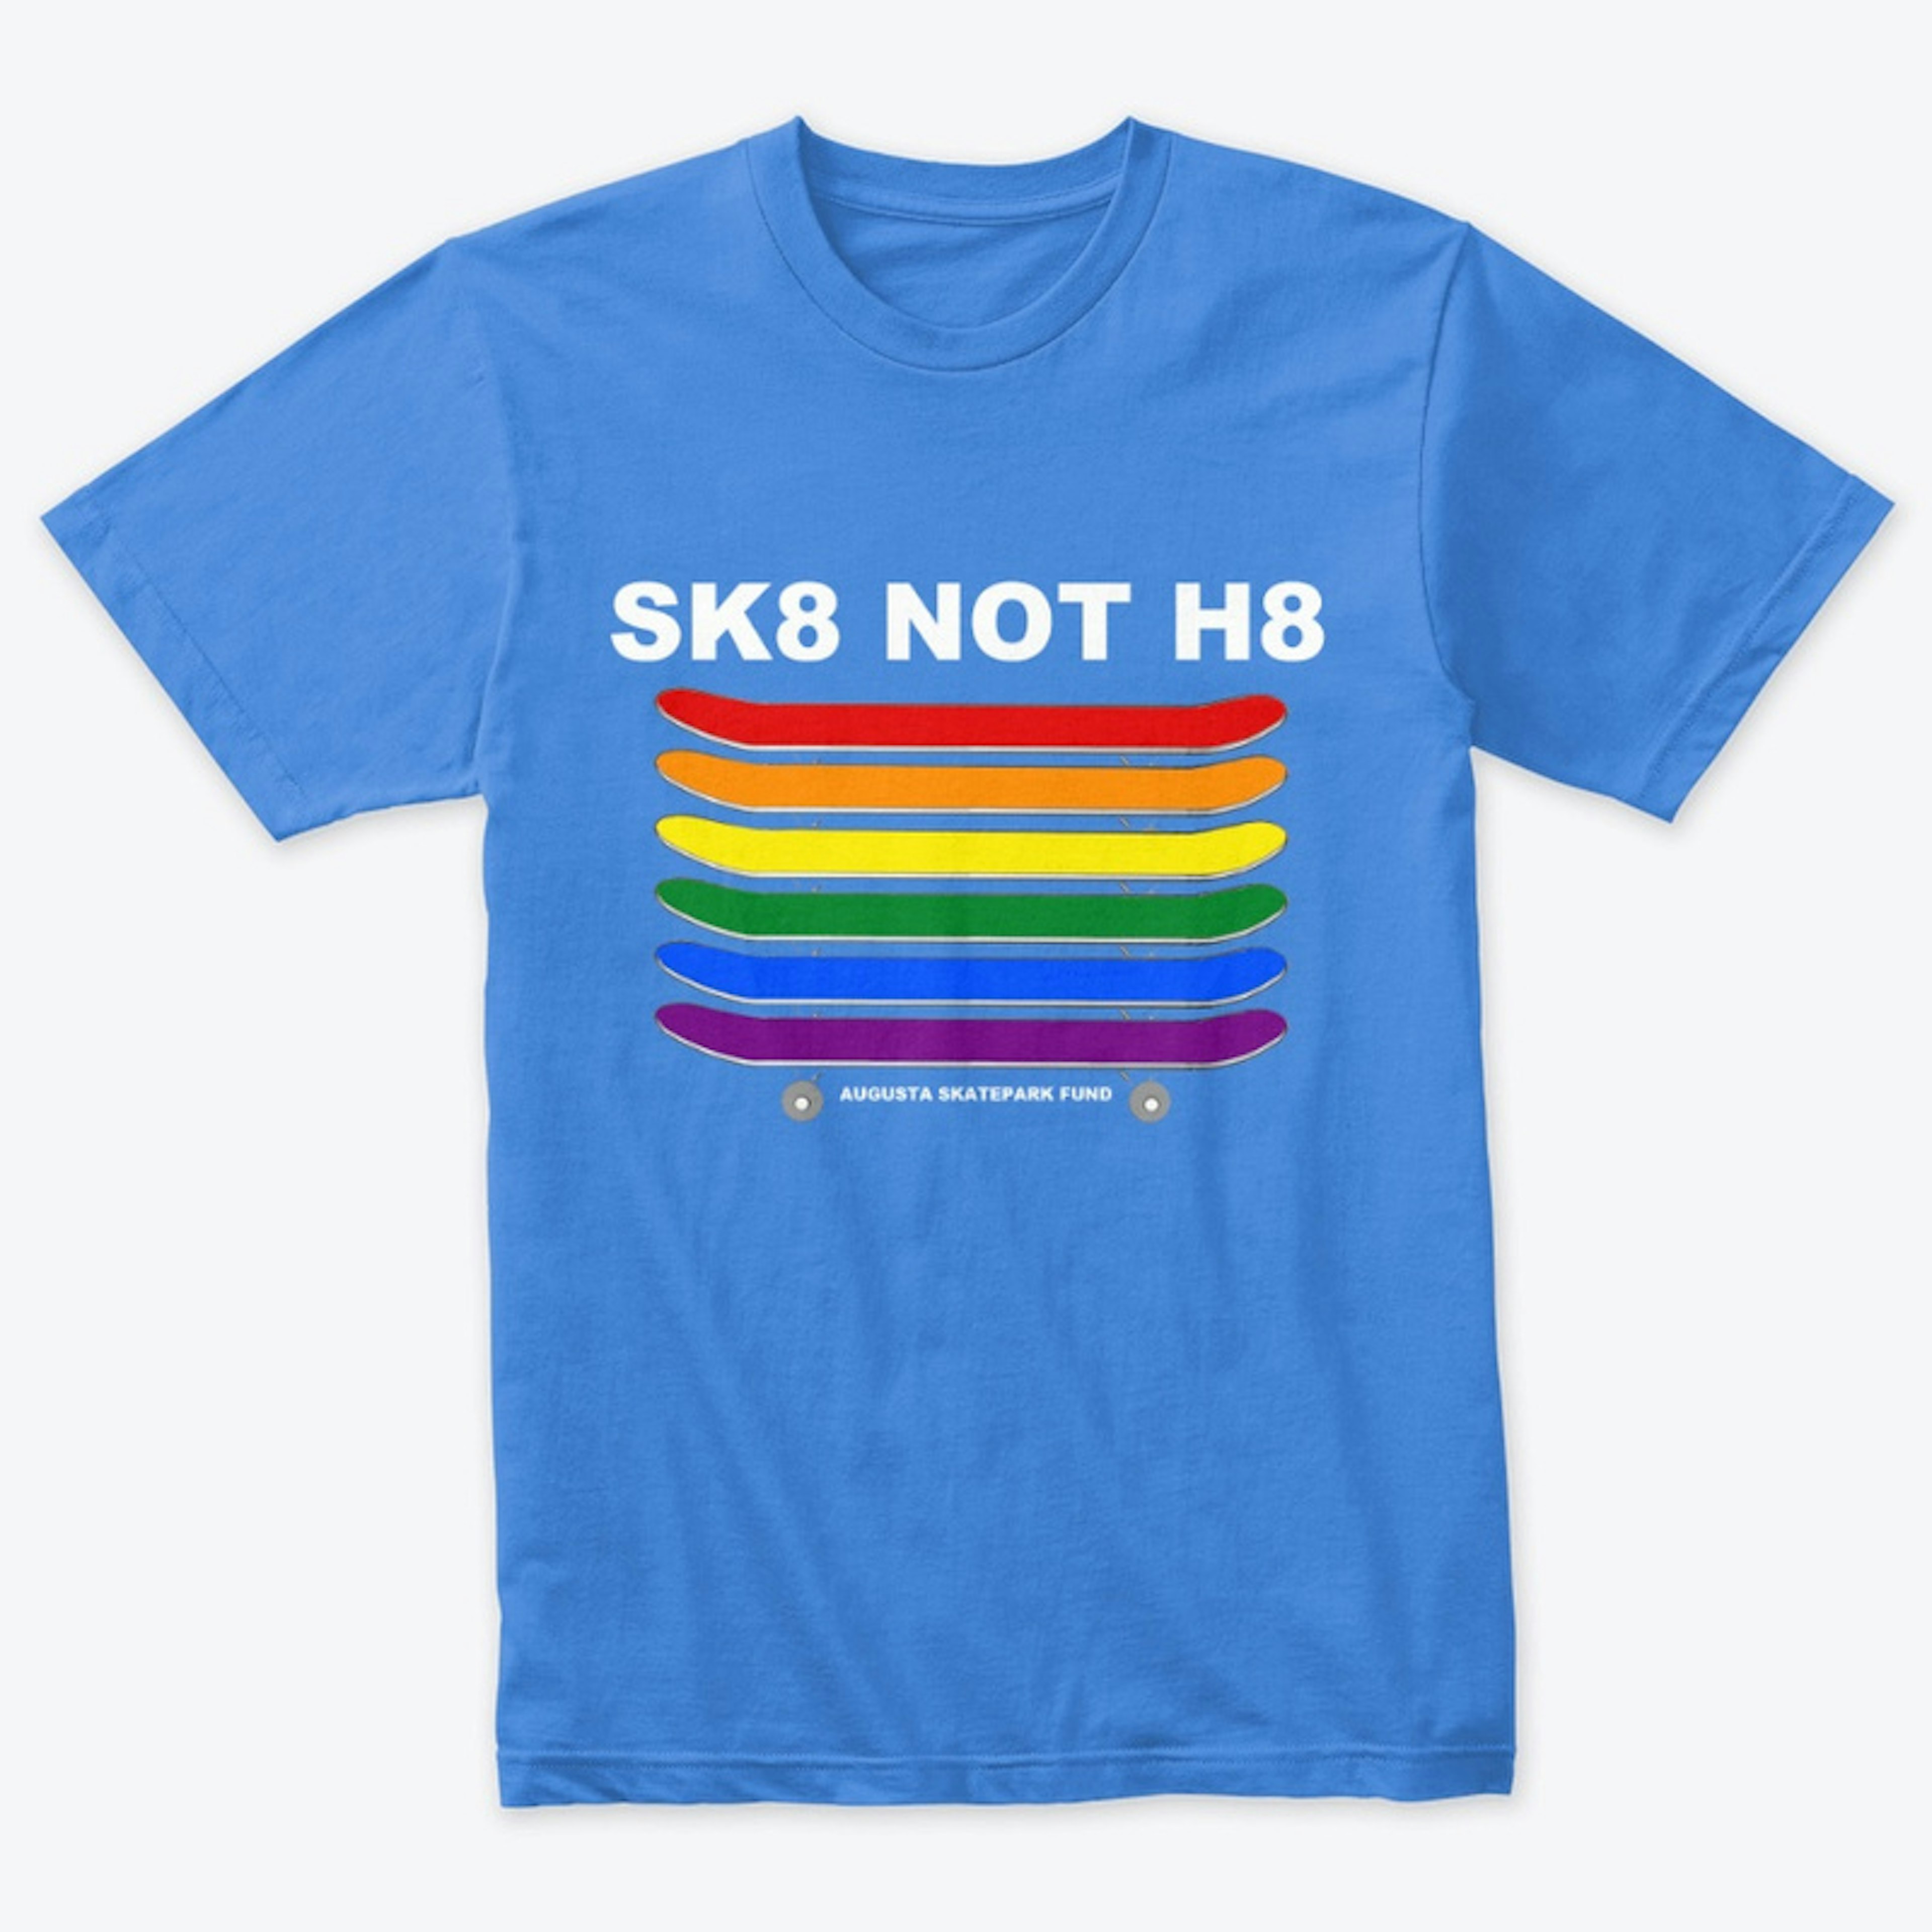 SK8 NOT H8